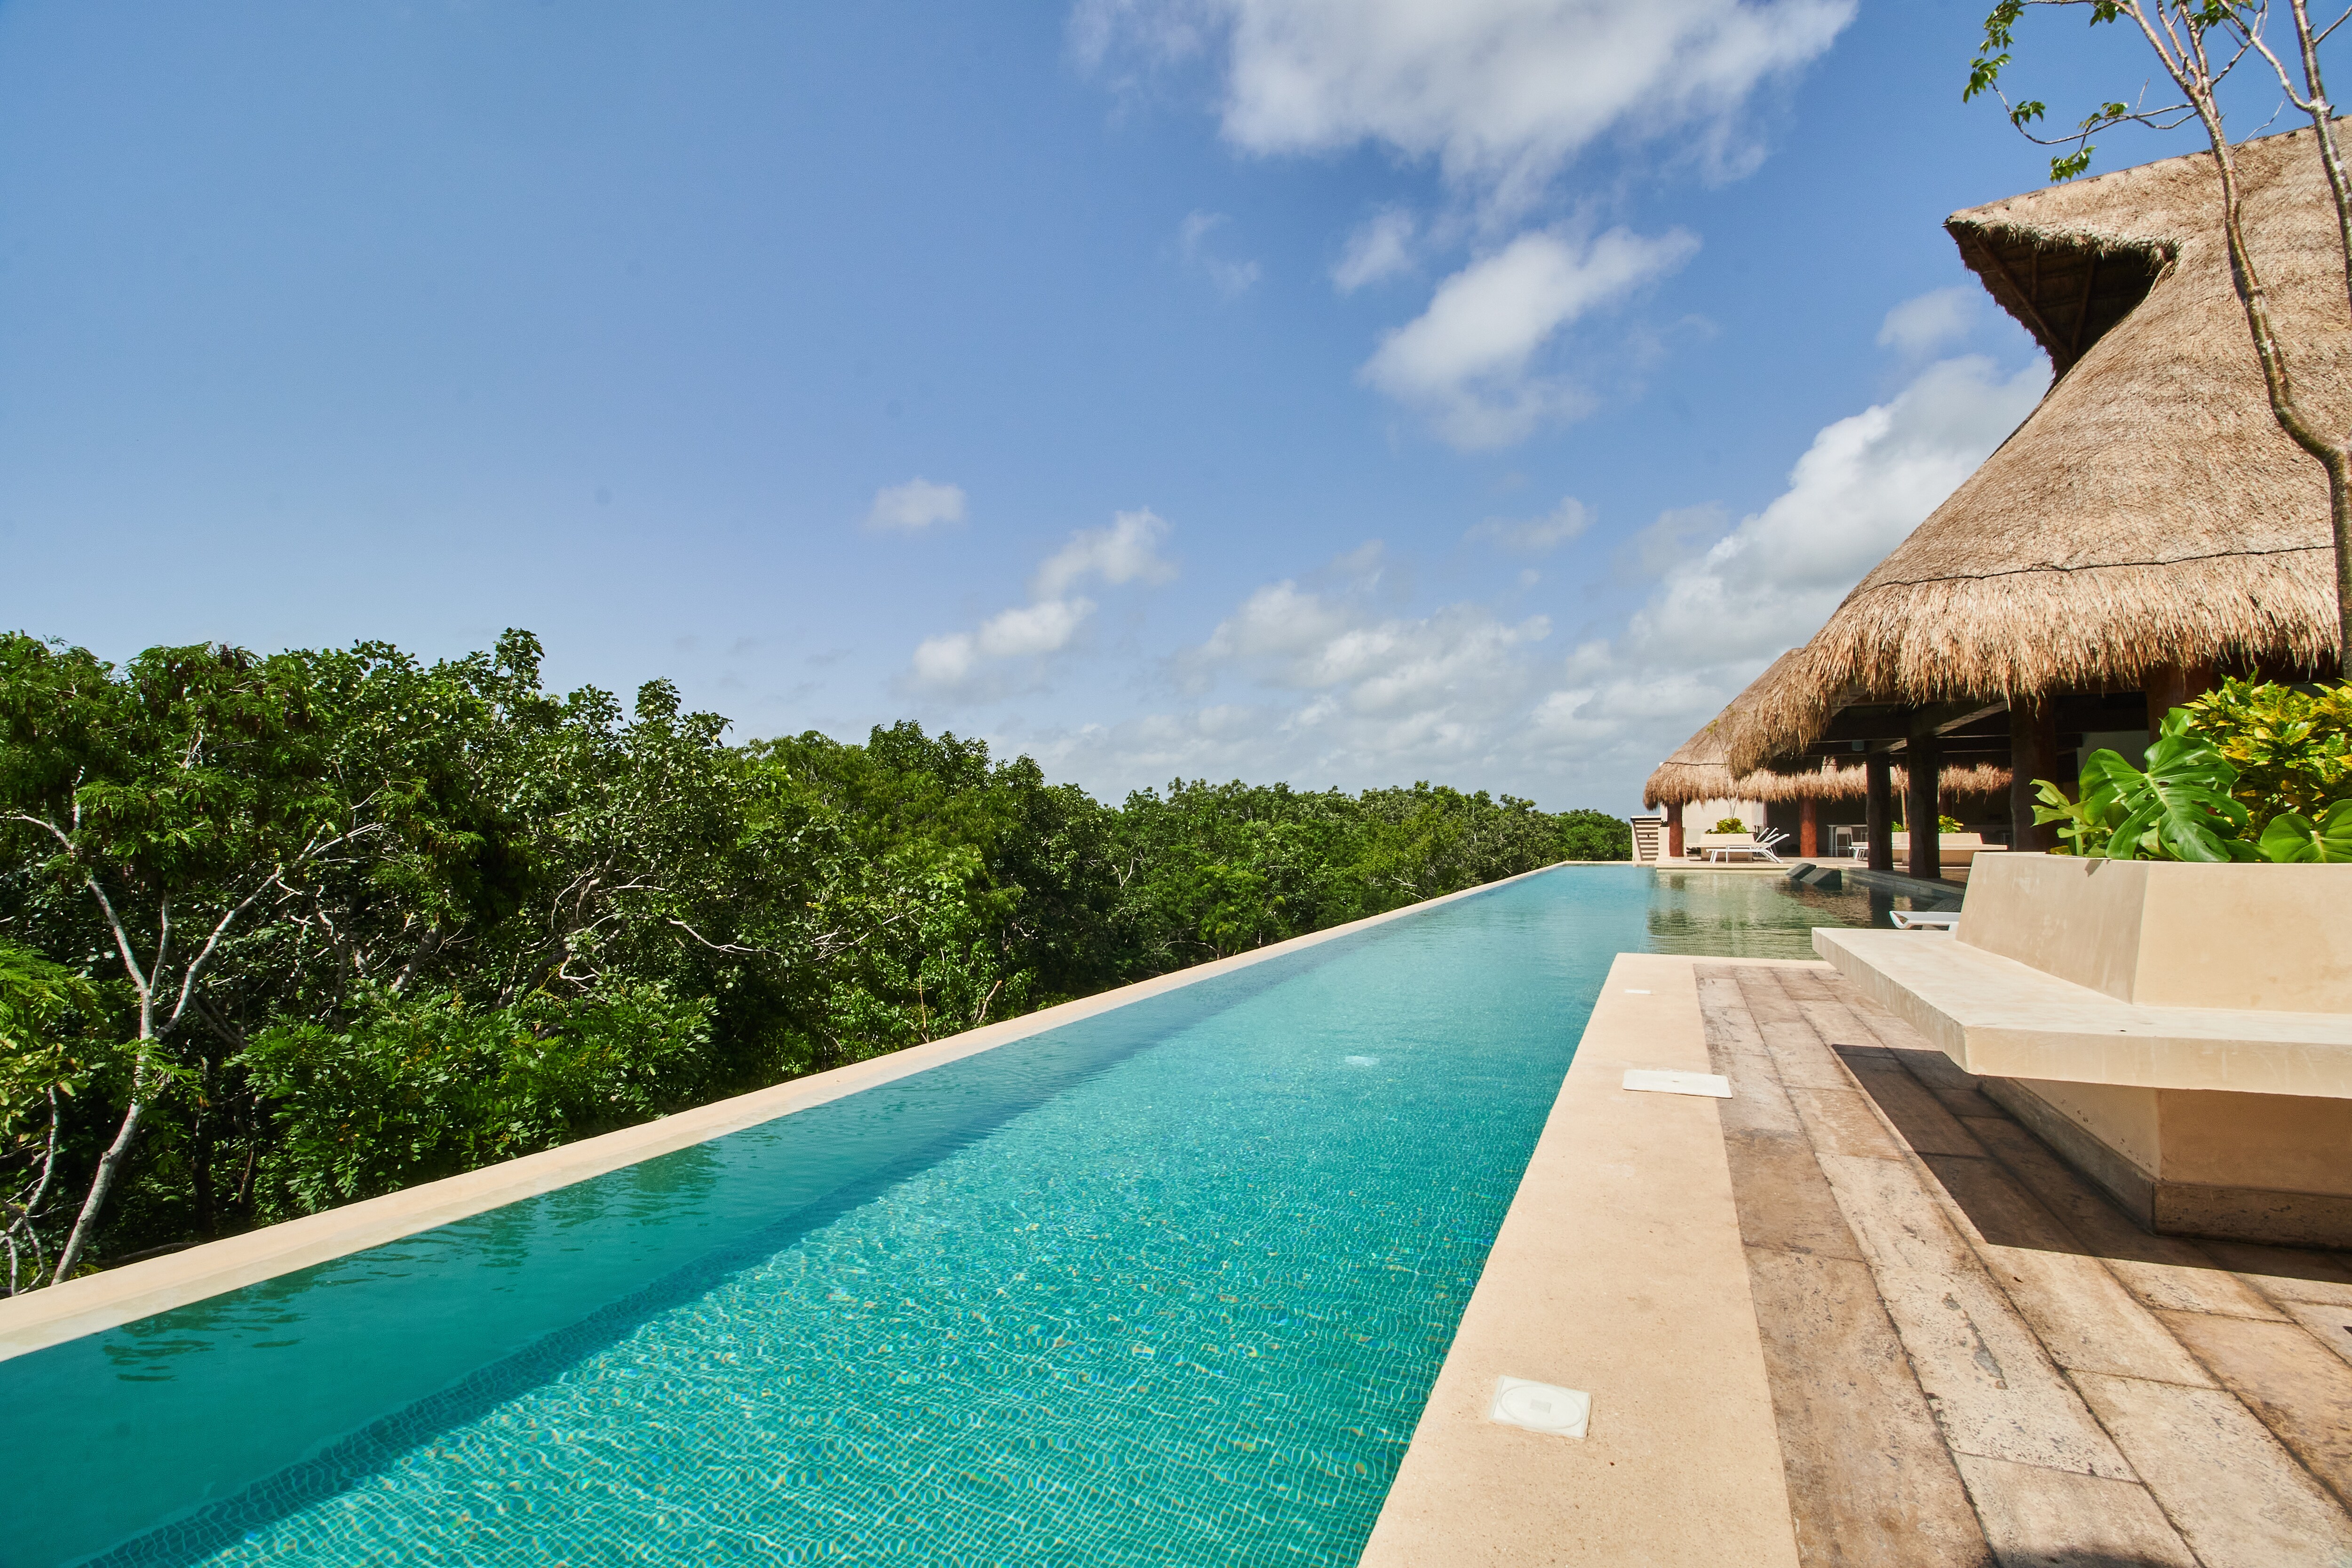 Enjoy a spectacular view from the infinity pool.